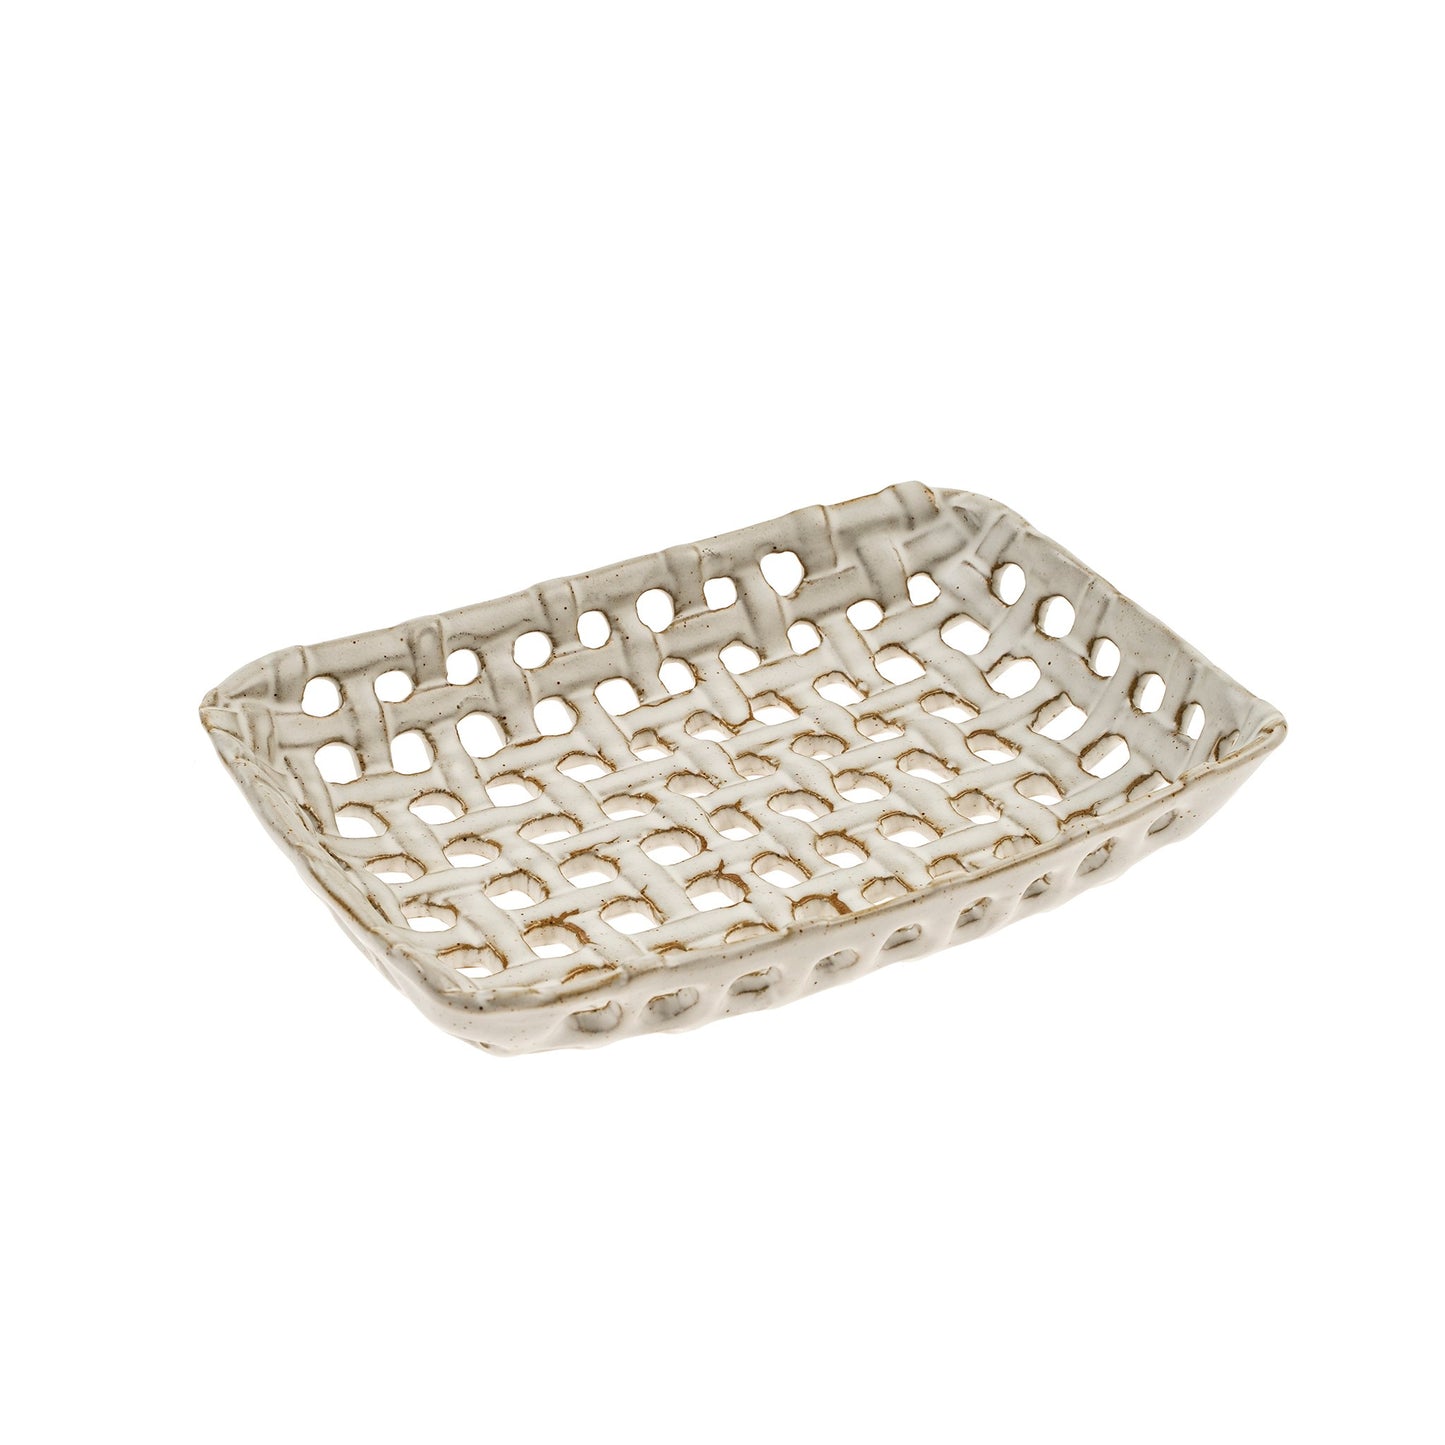 Porcelain Basket Tray - Small